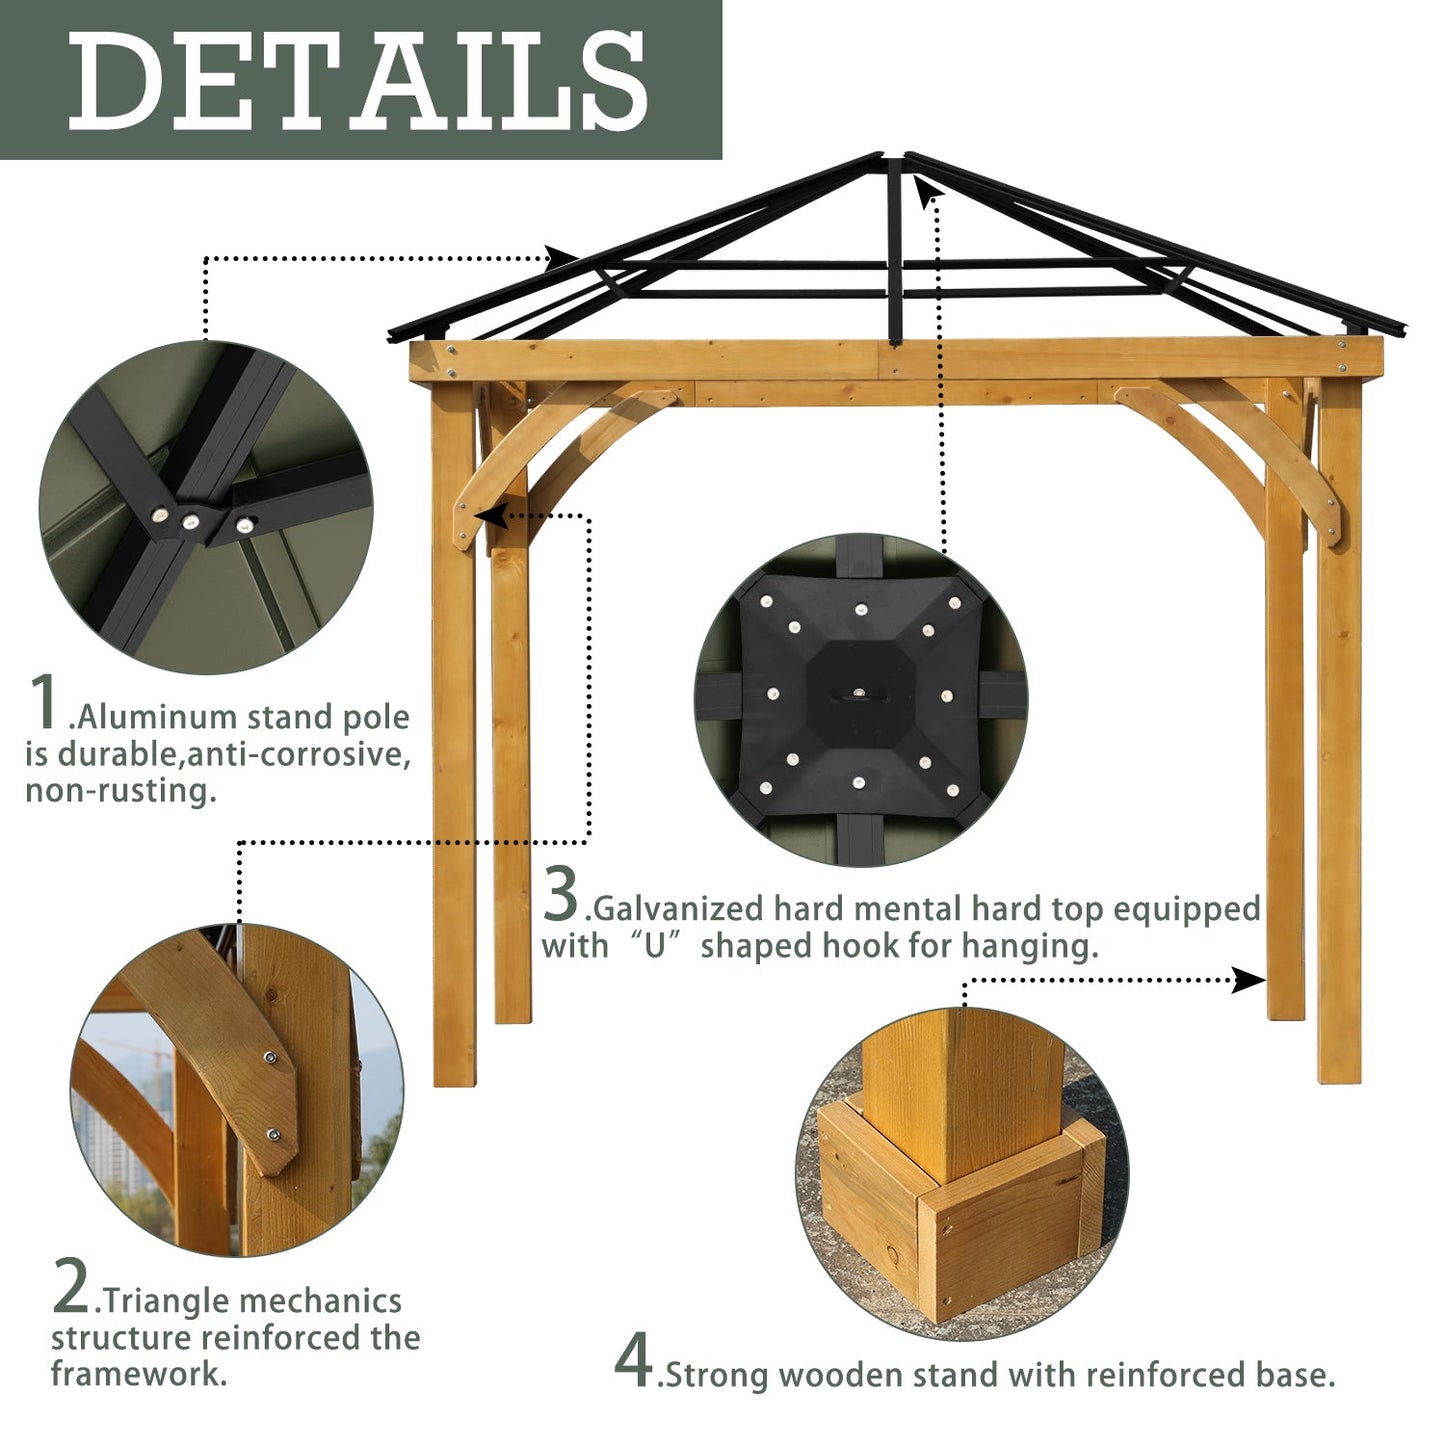 10 x 10 ft. Outdoor Solid Wooden Frame Gazebo with Galvanized Metal Hardtop Roof, for Patio Backyard Deck and Lawns - Aoodor